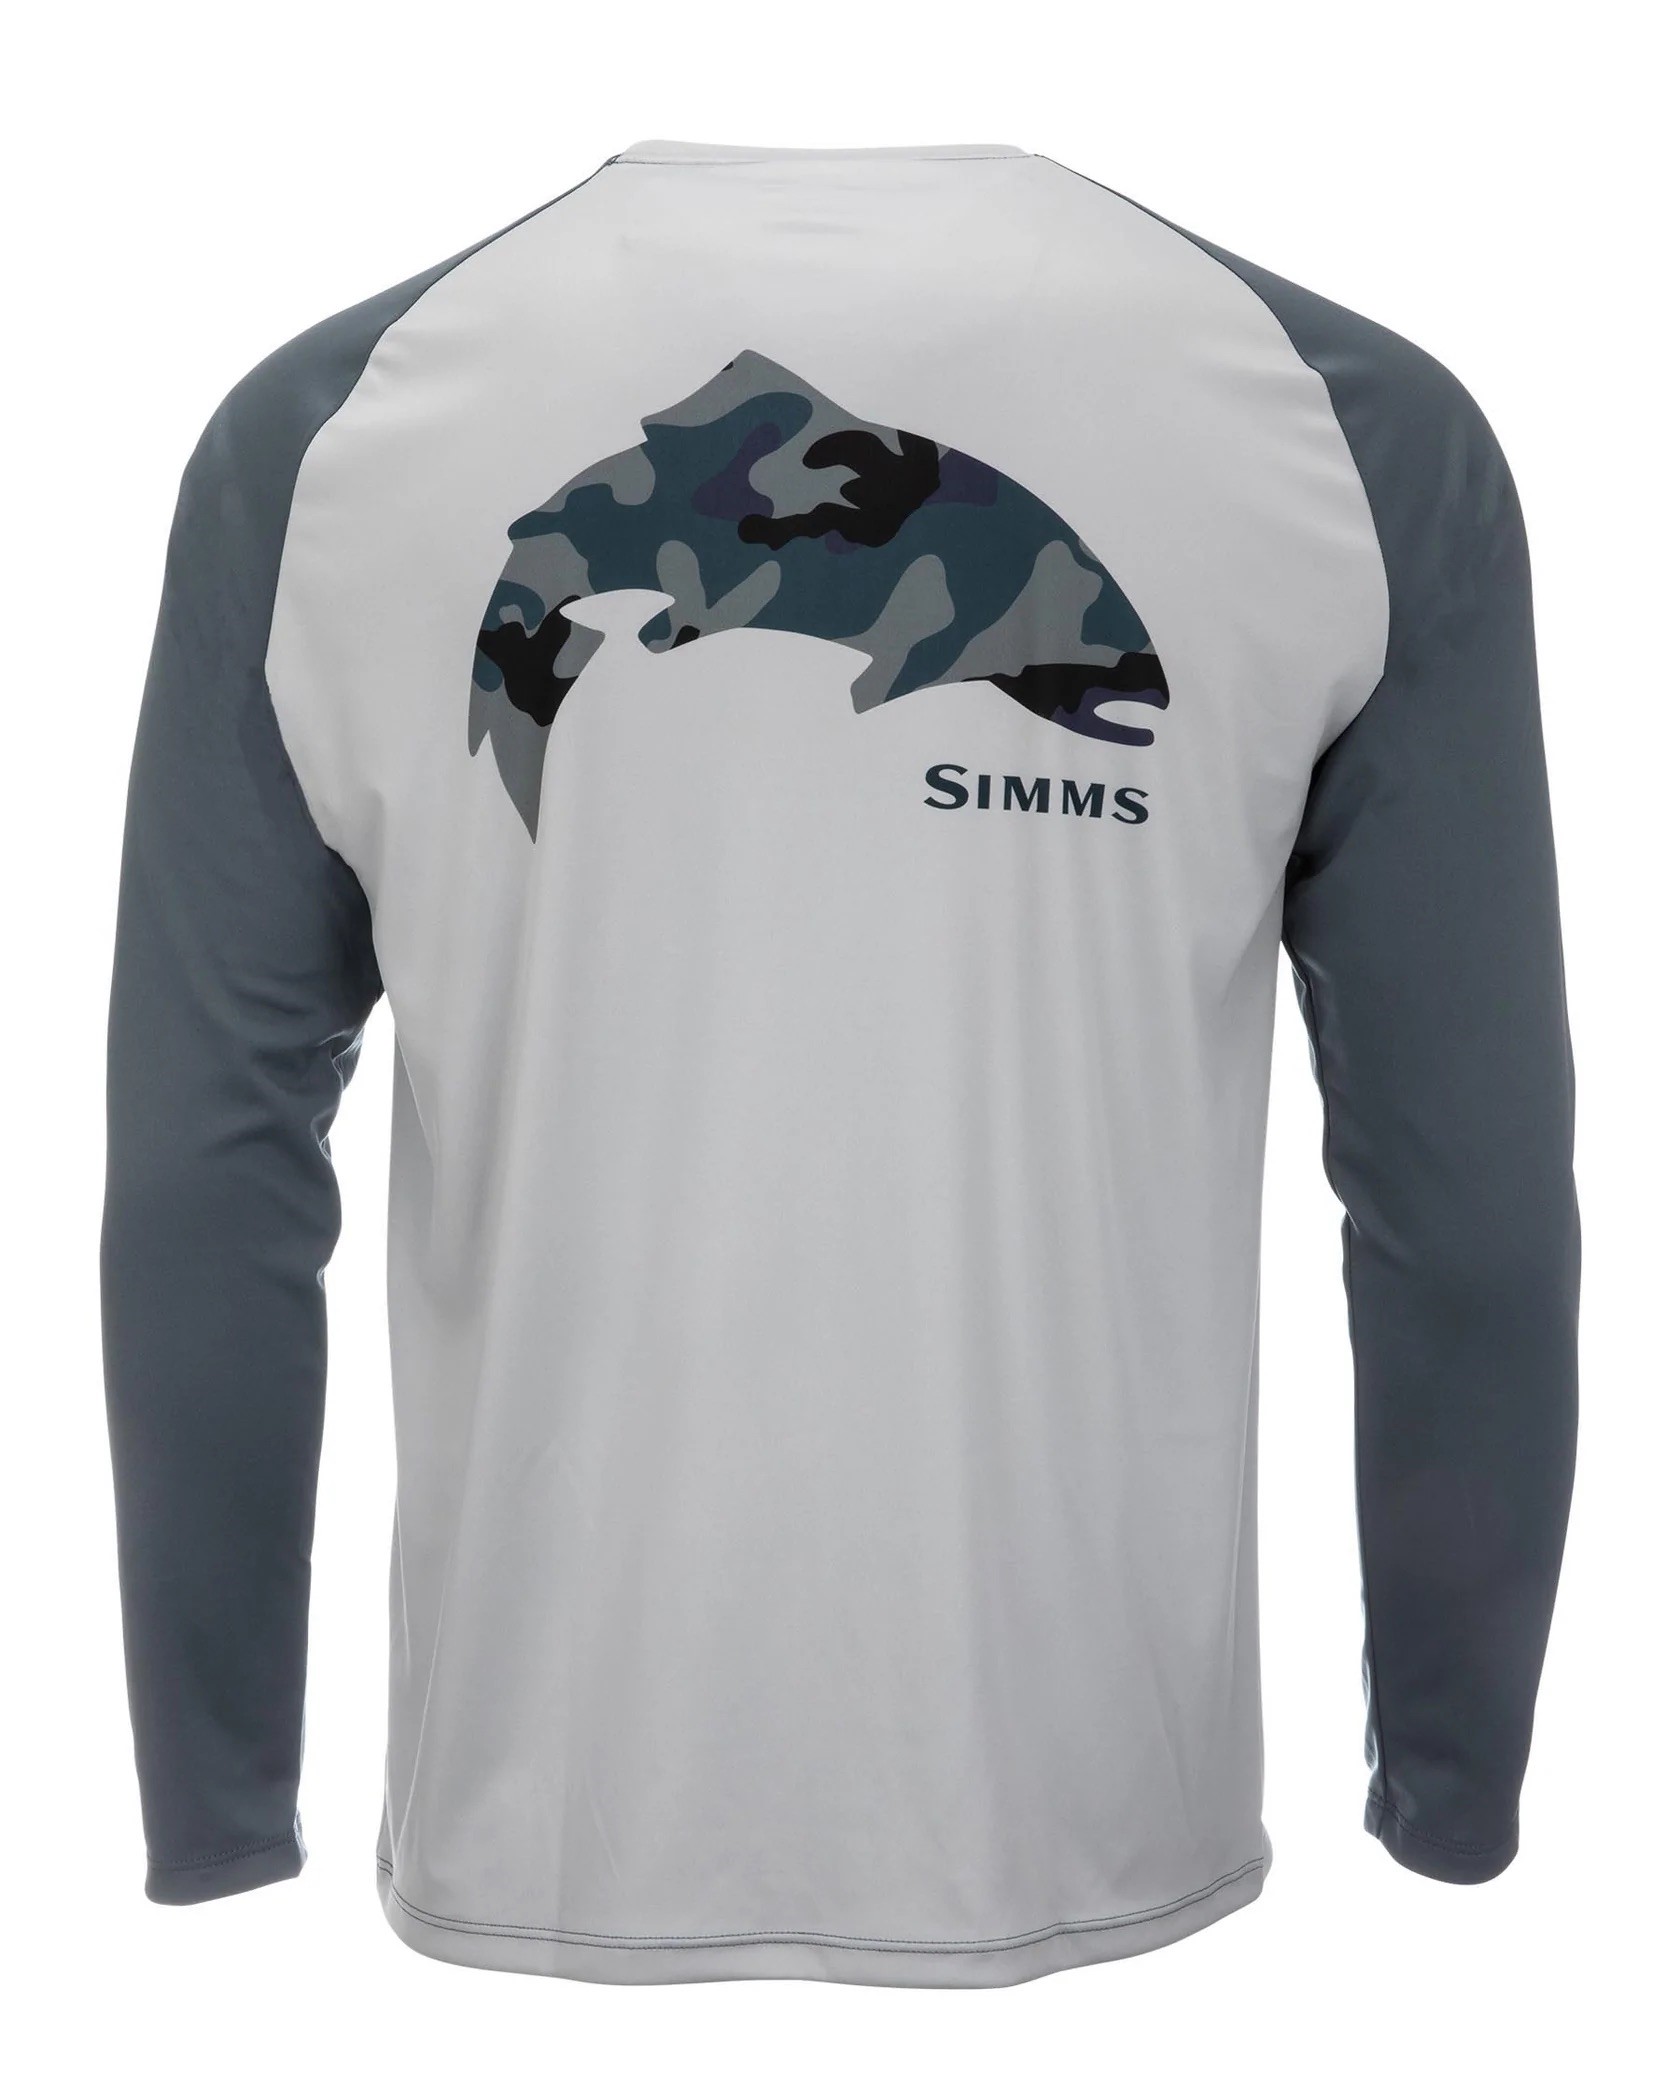 Simms M's Tech Tee - Trout/Sterling/Storm - XXL